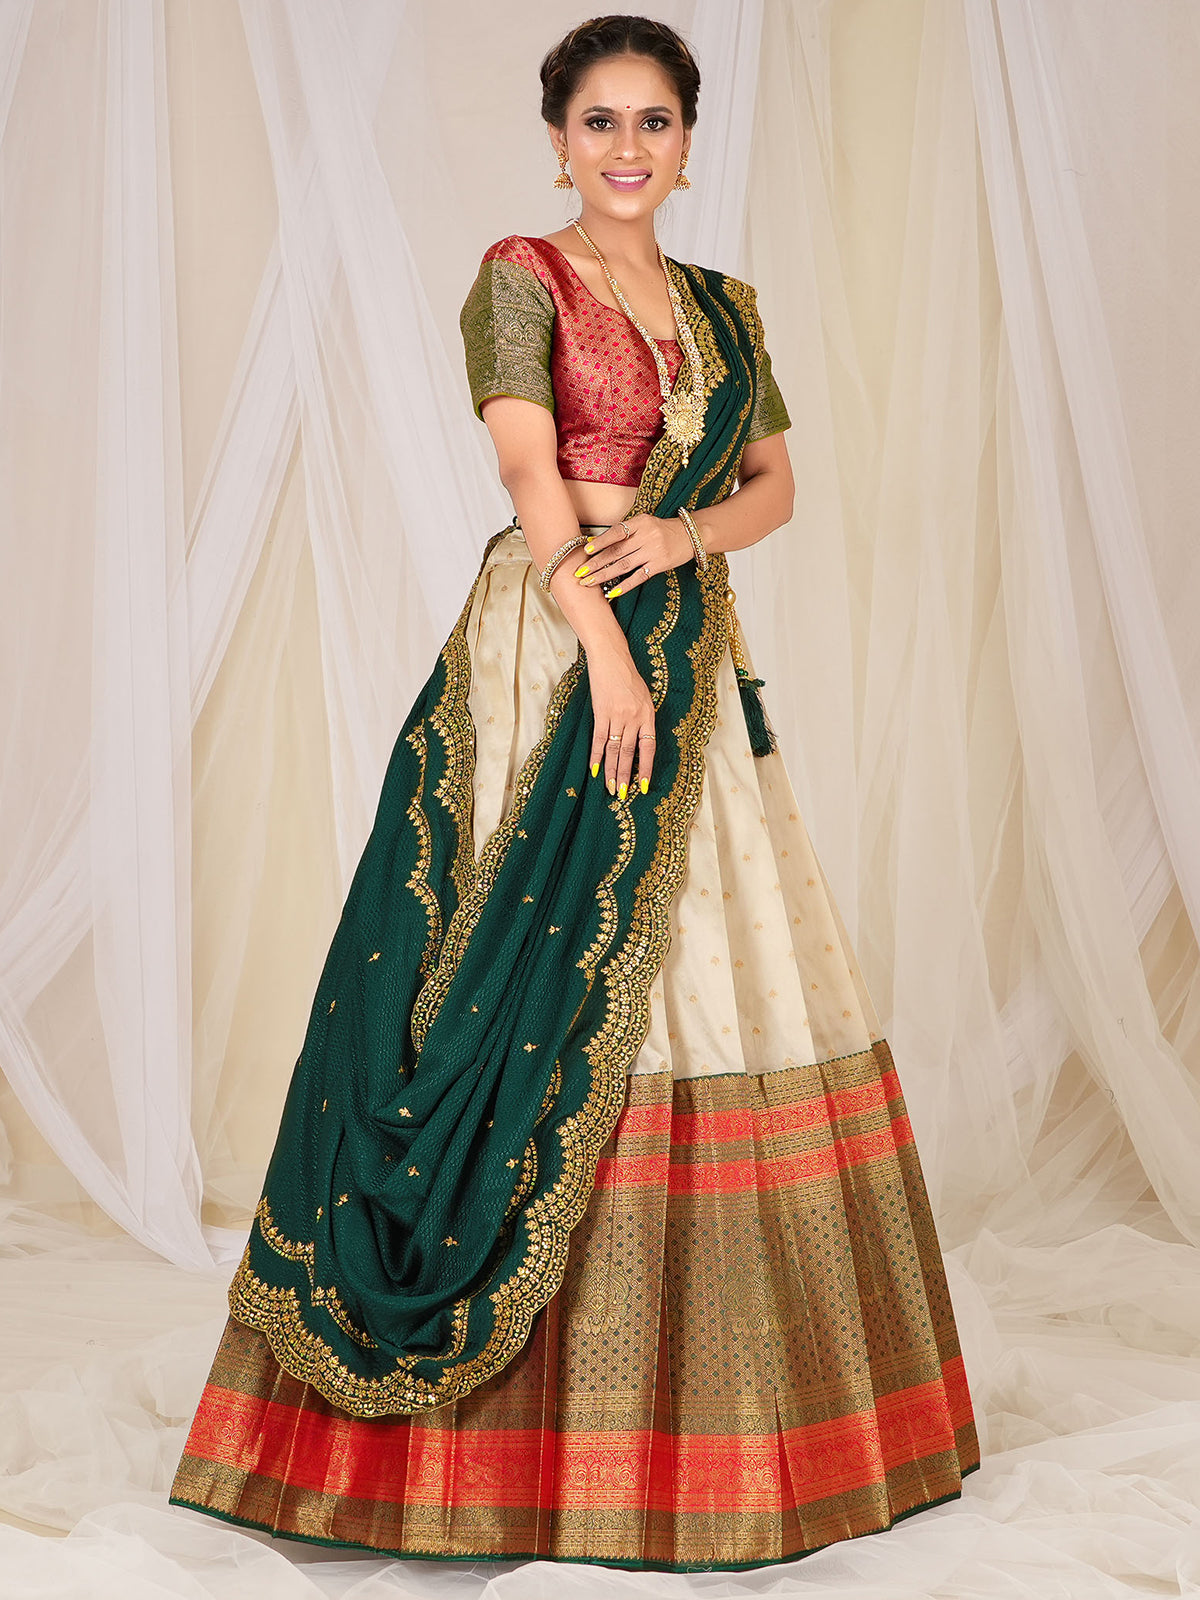 Trending | $193 - $258 - Beige Engagement Readymade Chinon Dimond Designer  Lehenga Choli, Beige Engagement Readymade Chinon Dimond Designer Lehengas  and Beige Engagement Readymade Chinon Dimond Ghagra Chaniya Cholis Online  Shopping